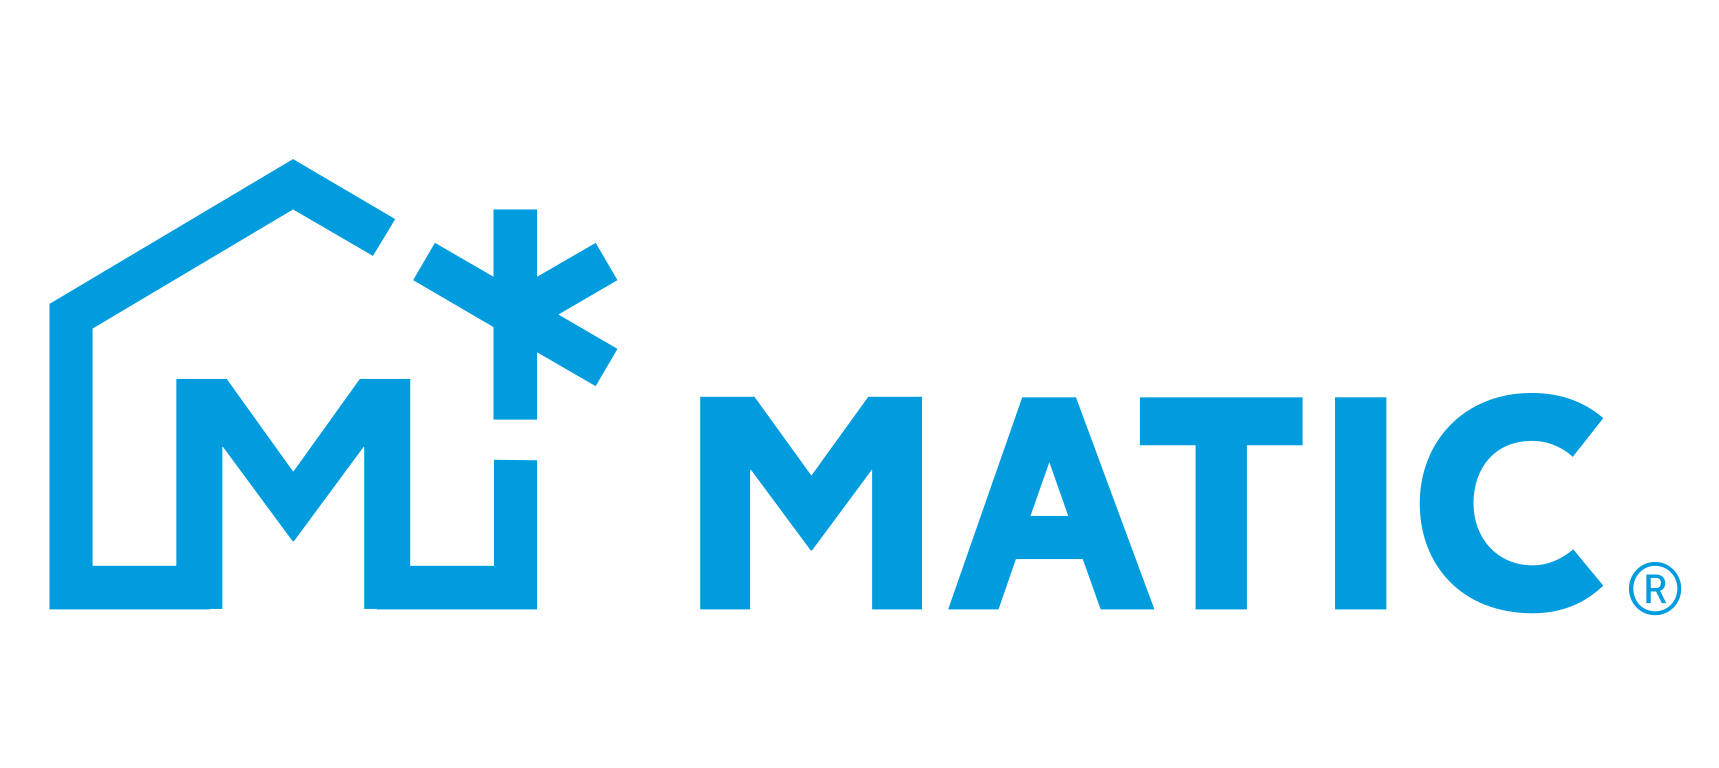 MATIC - Home Cleaning Service